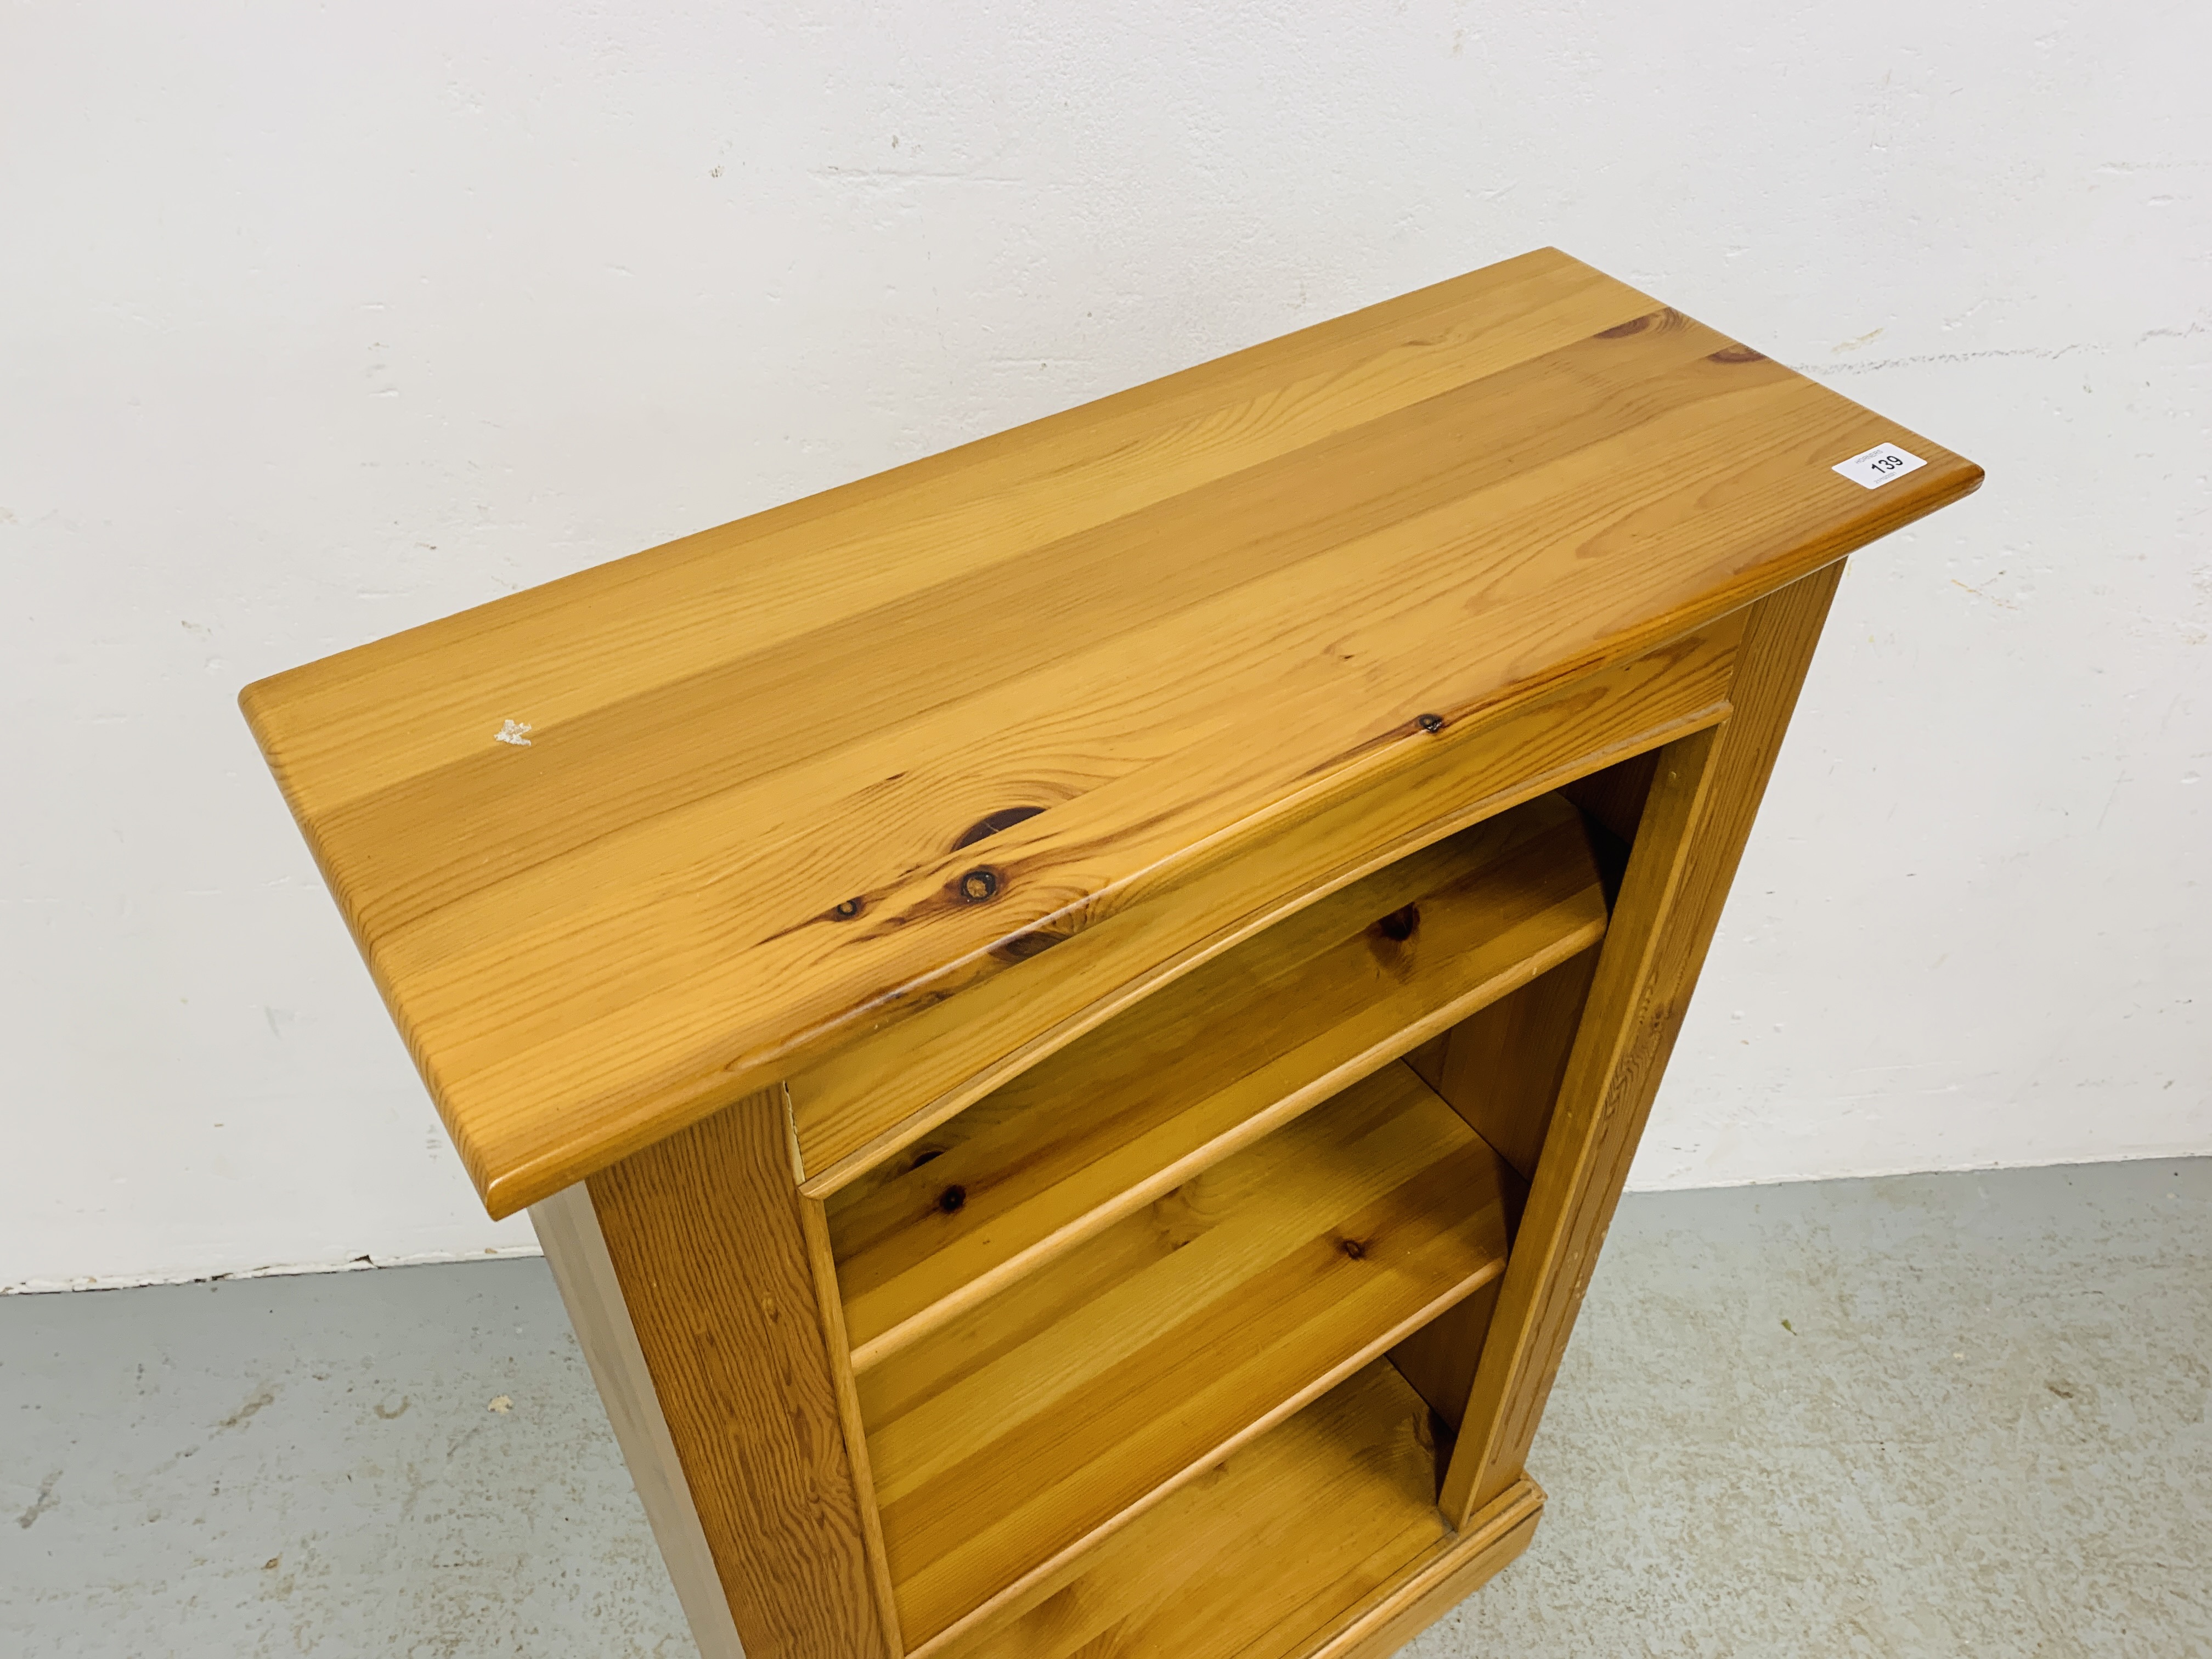 A SOLID HONEY PINE BOOKSHELF WITH TONGUE AND GROOVE BOARDED BACK - W 66CM. D 26CM. H 107CM. - Image 3 of 8